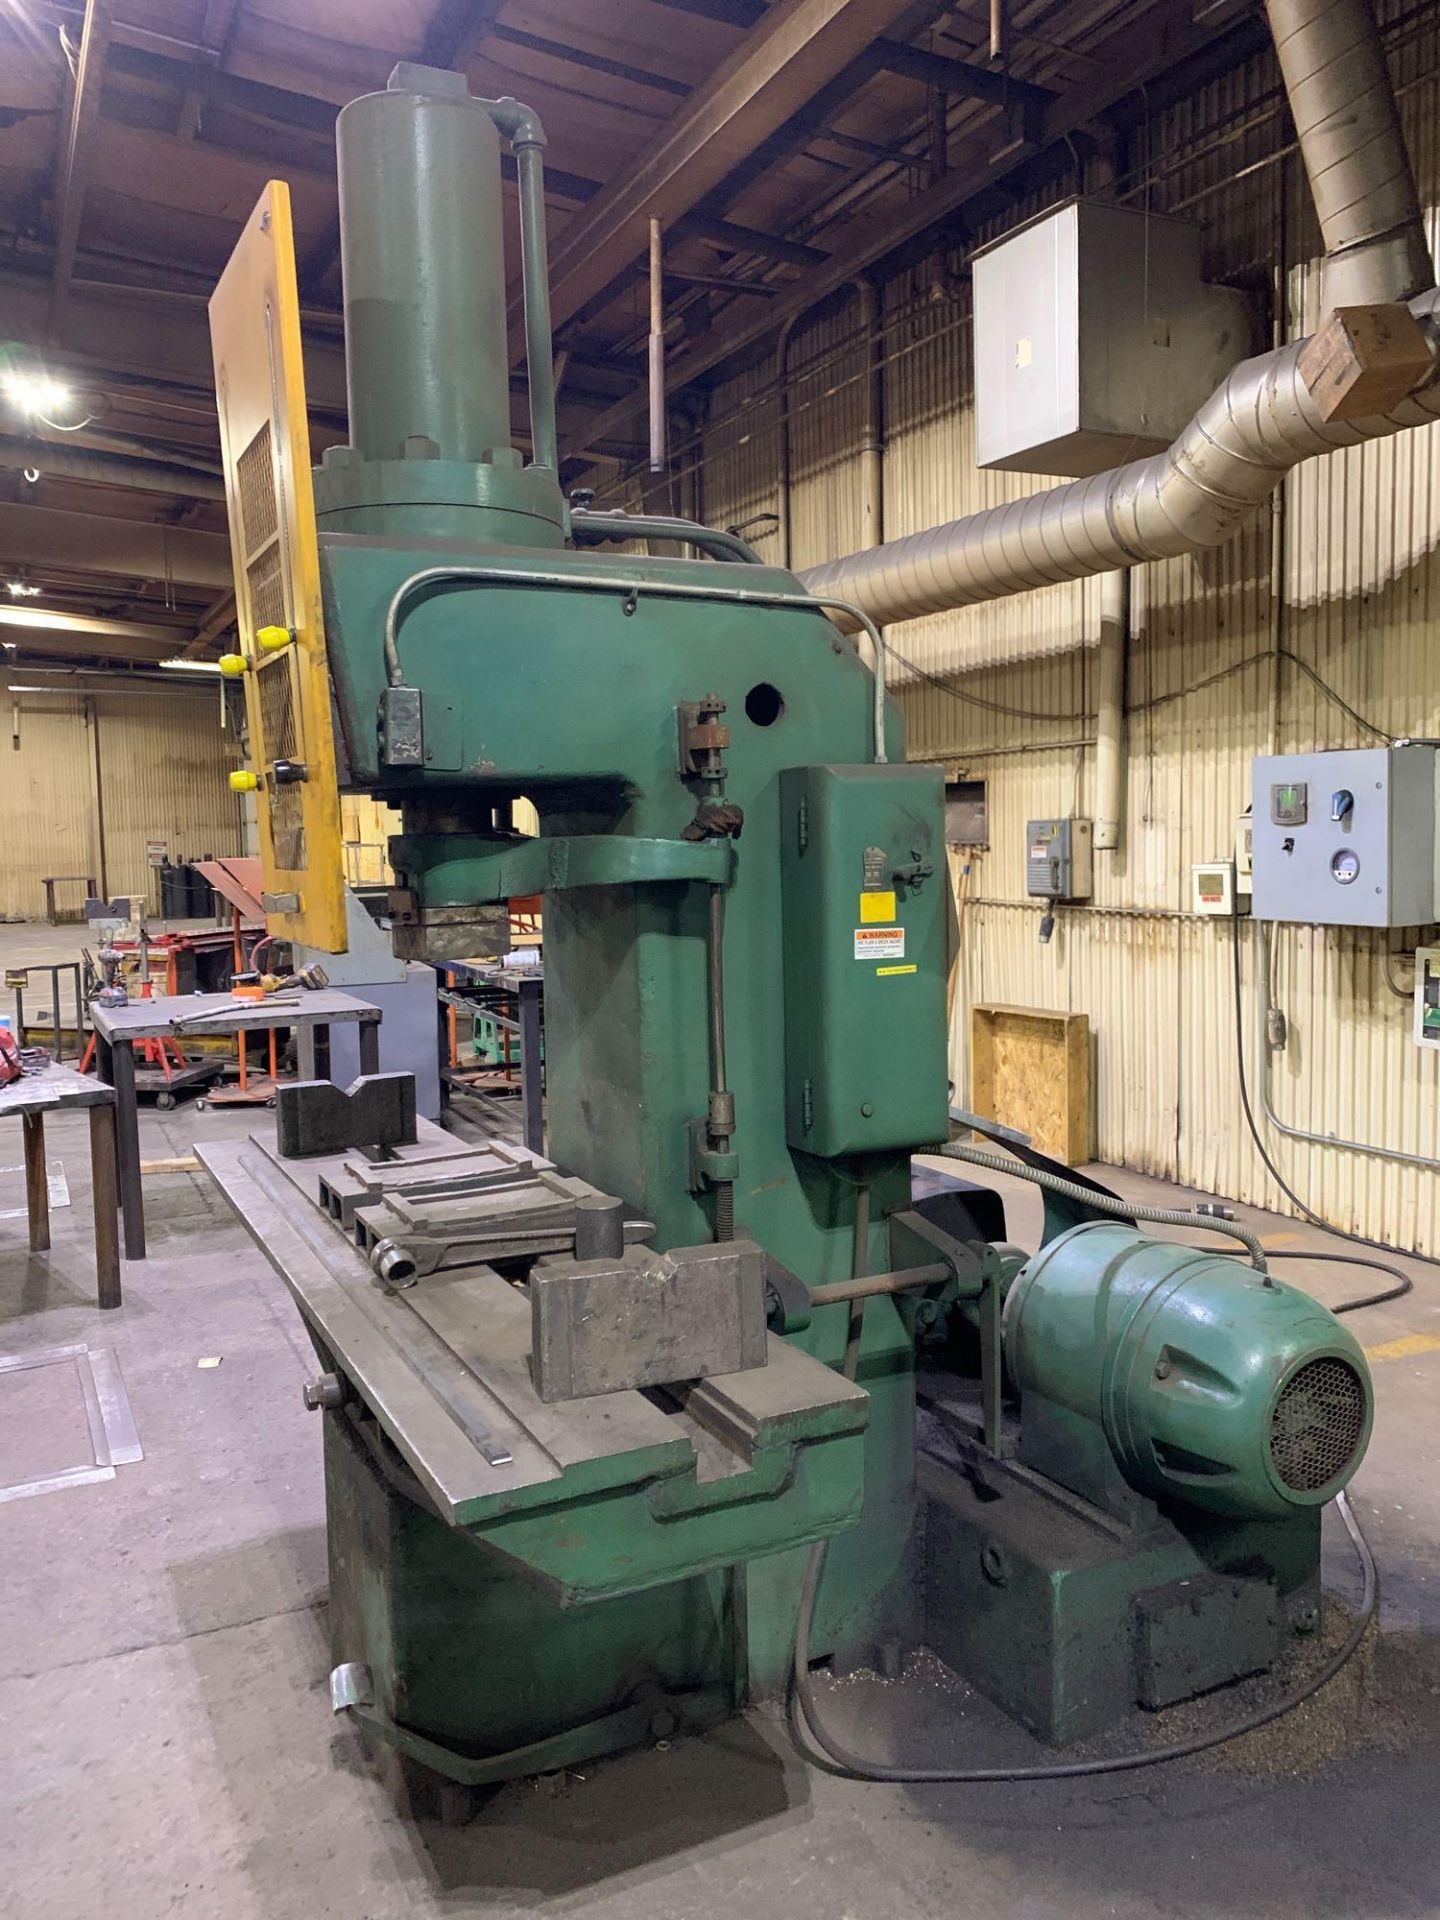 Oilgear Model DH-2017 50 Ton Hydraulic Straightening Press Serial Number 33876 - Image 4 of 16